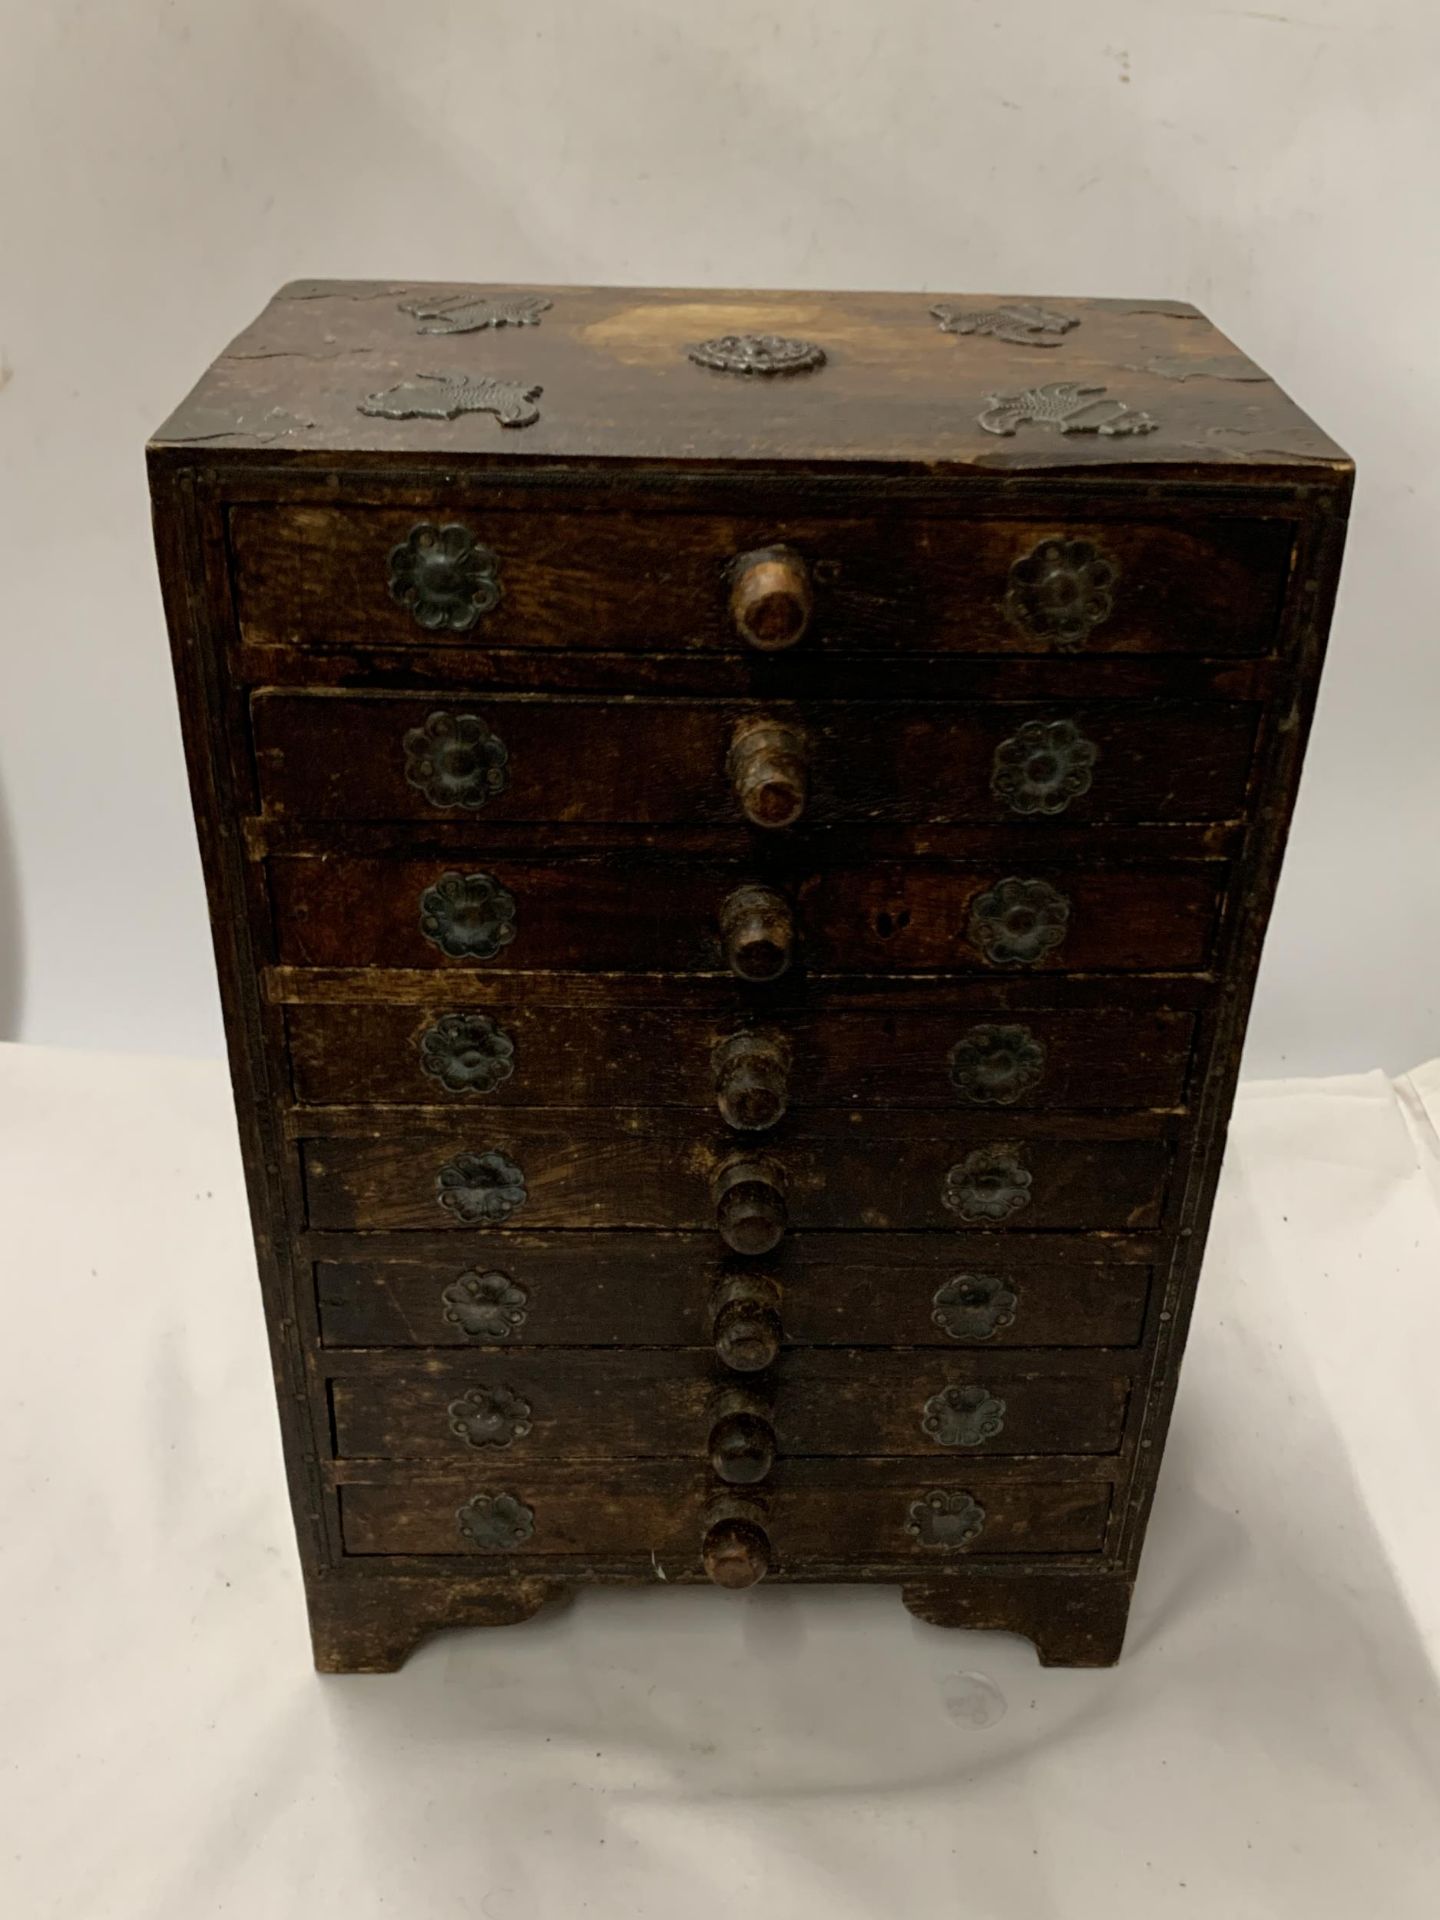 A VINTAGE WOODEN TABLE TOP EIGHT DRAWER CABINET WITH METAL MOUNTS AND FITTINGS, 34 X 23 CM